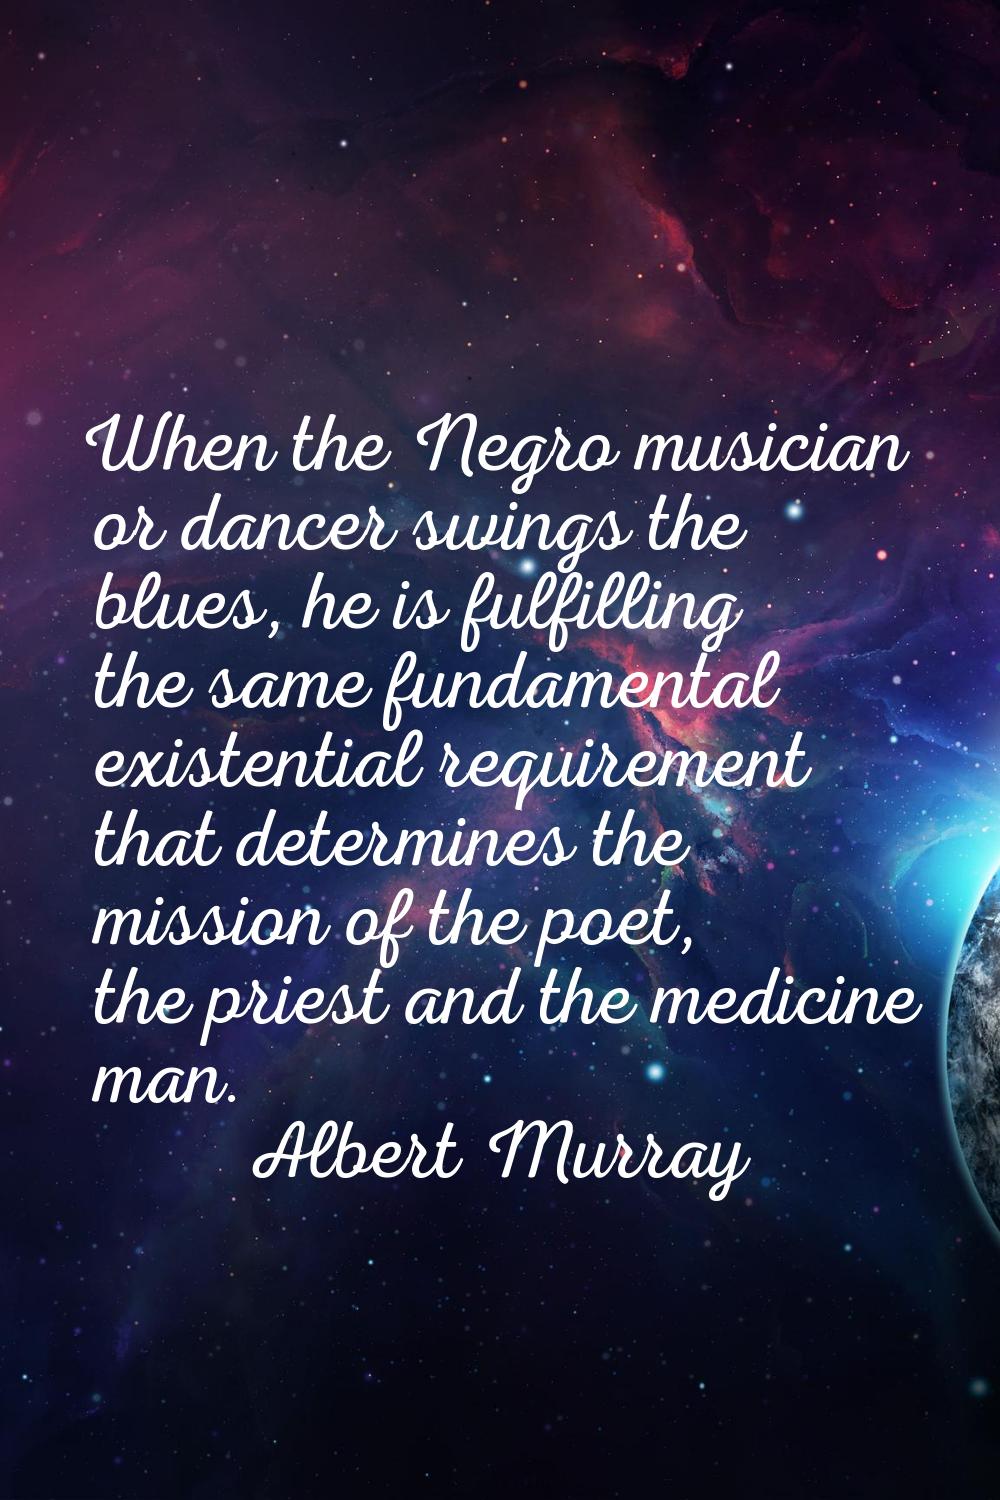 When the Negro musician or dancer swings the blues, he is fulfilling the same fundamental existenti